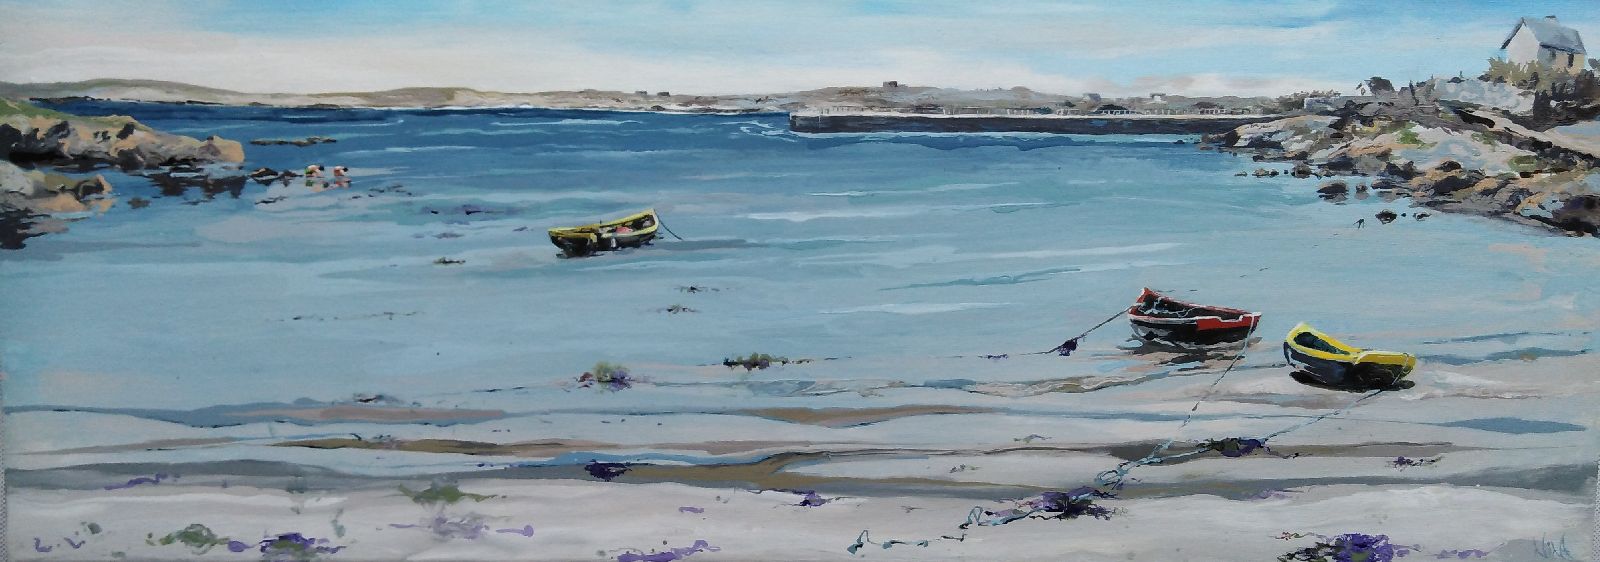 Sun Kissed Day, Ervellagh, Roundstone  by Nina Patterson